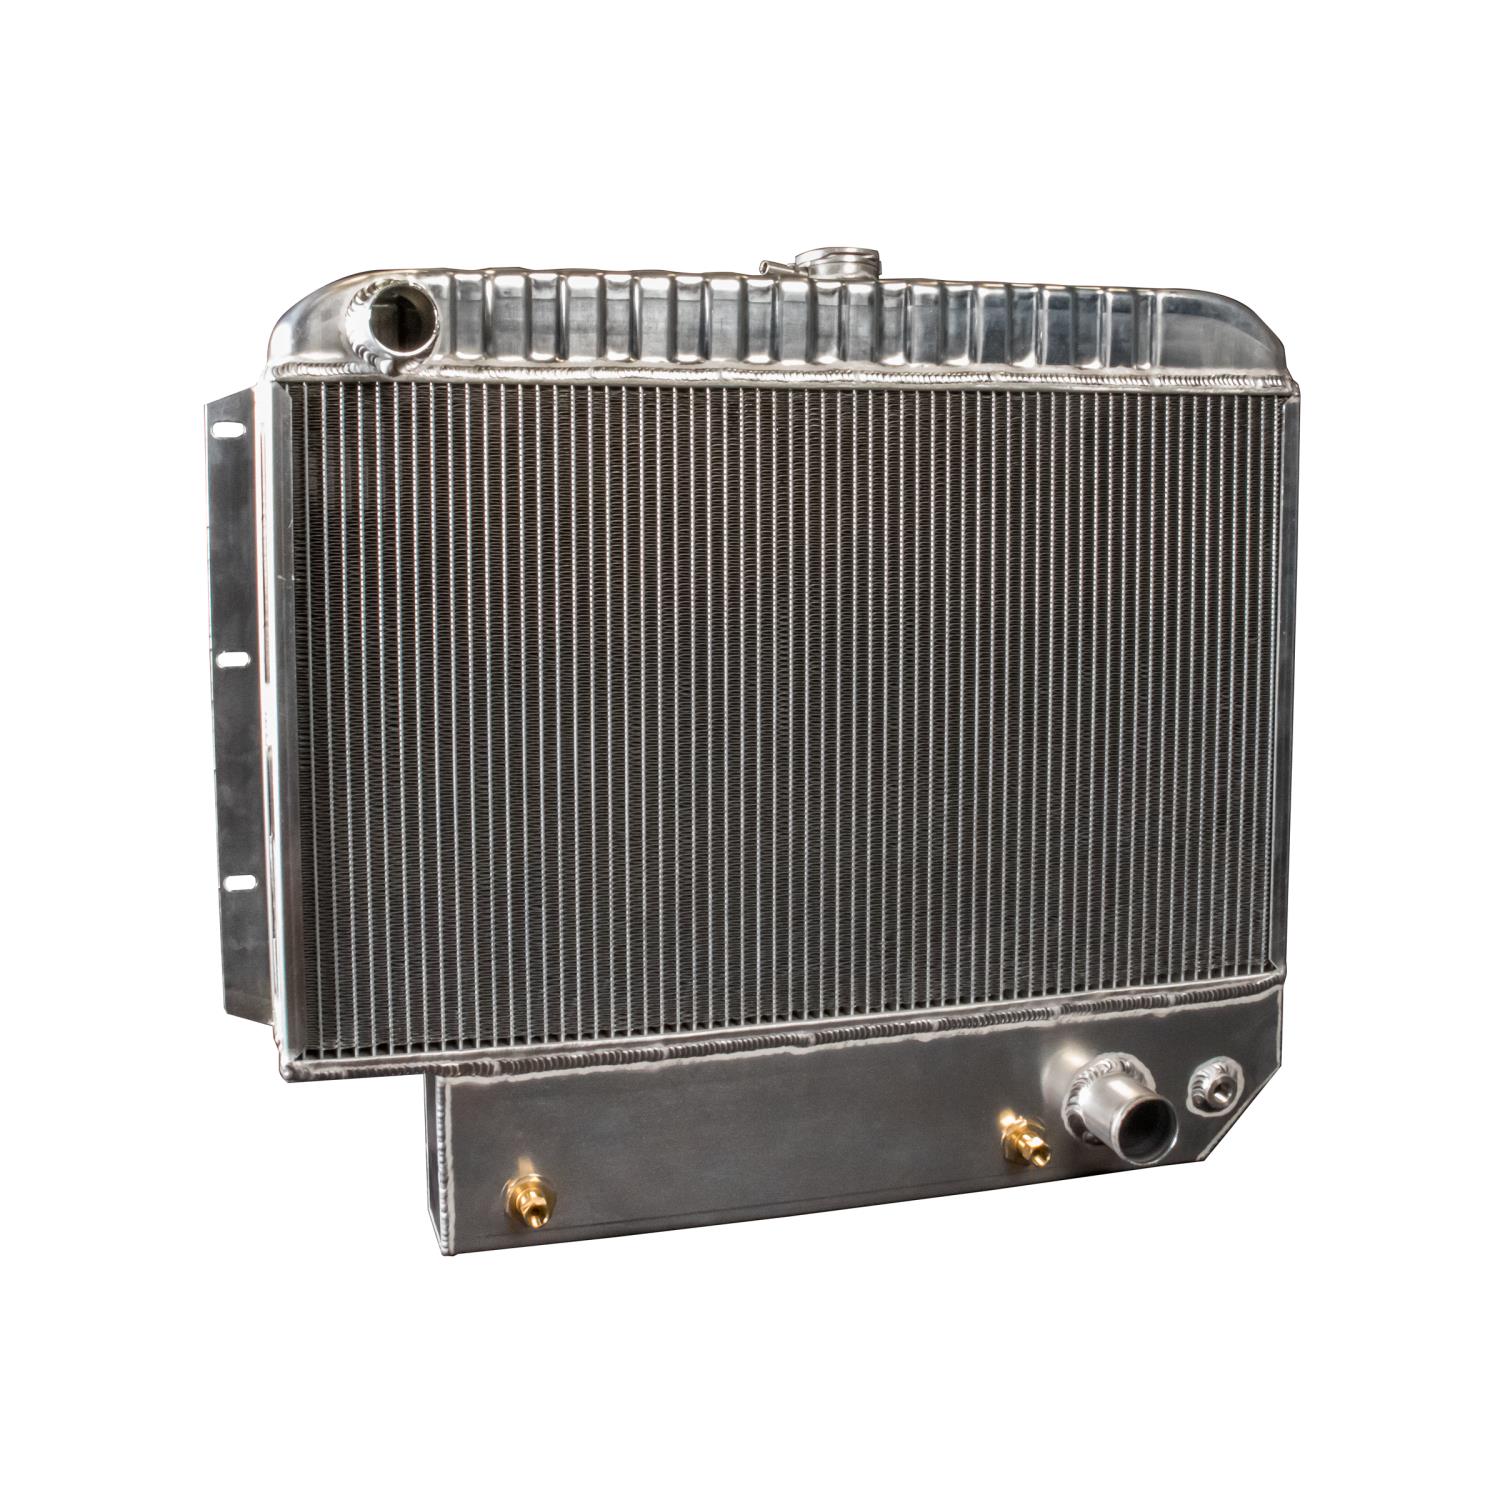 PerformanceFit Radiator for 1959-1963 Chevy Impala with Steering Box Knock out & Transmission Cooler